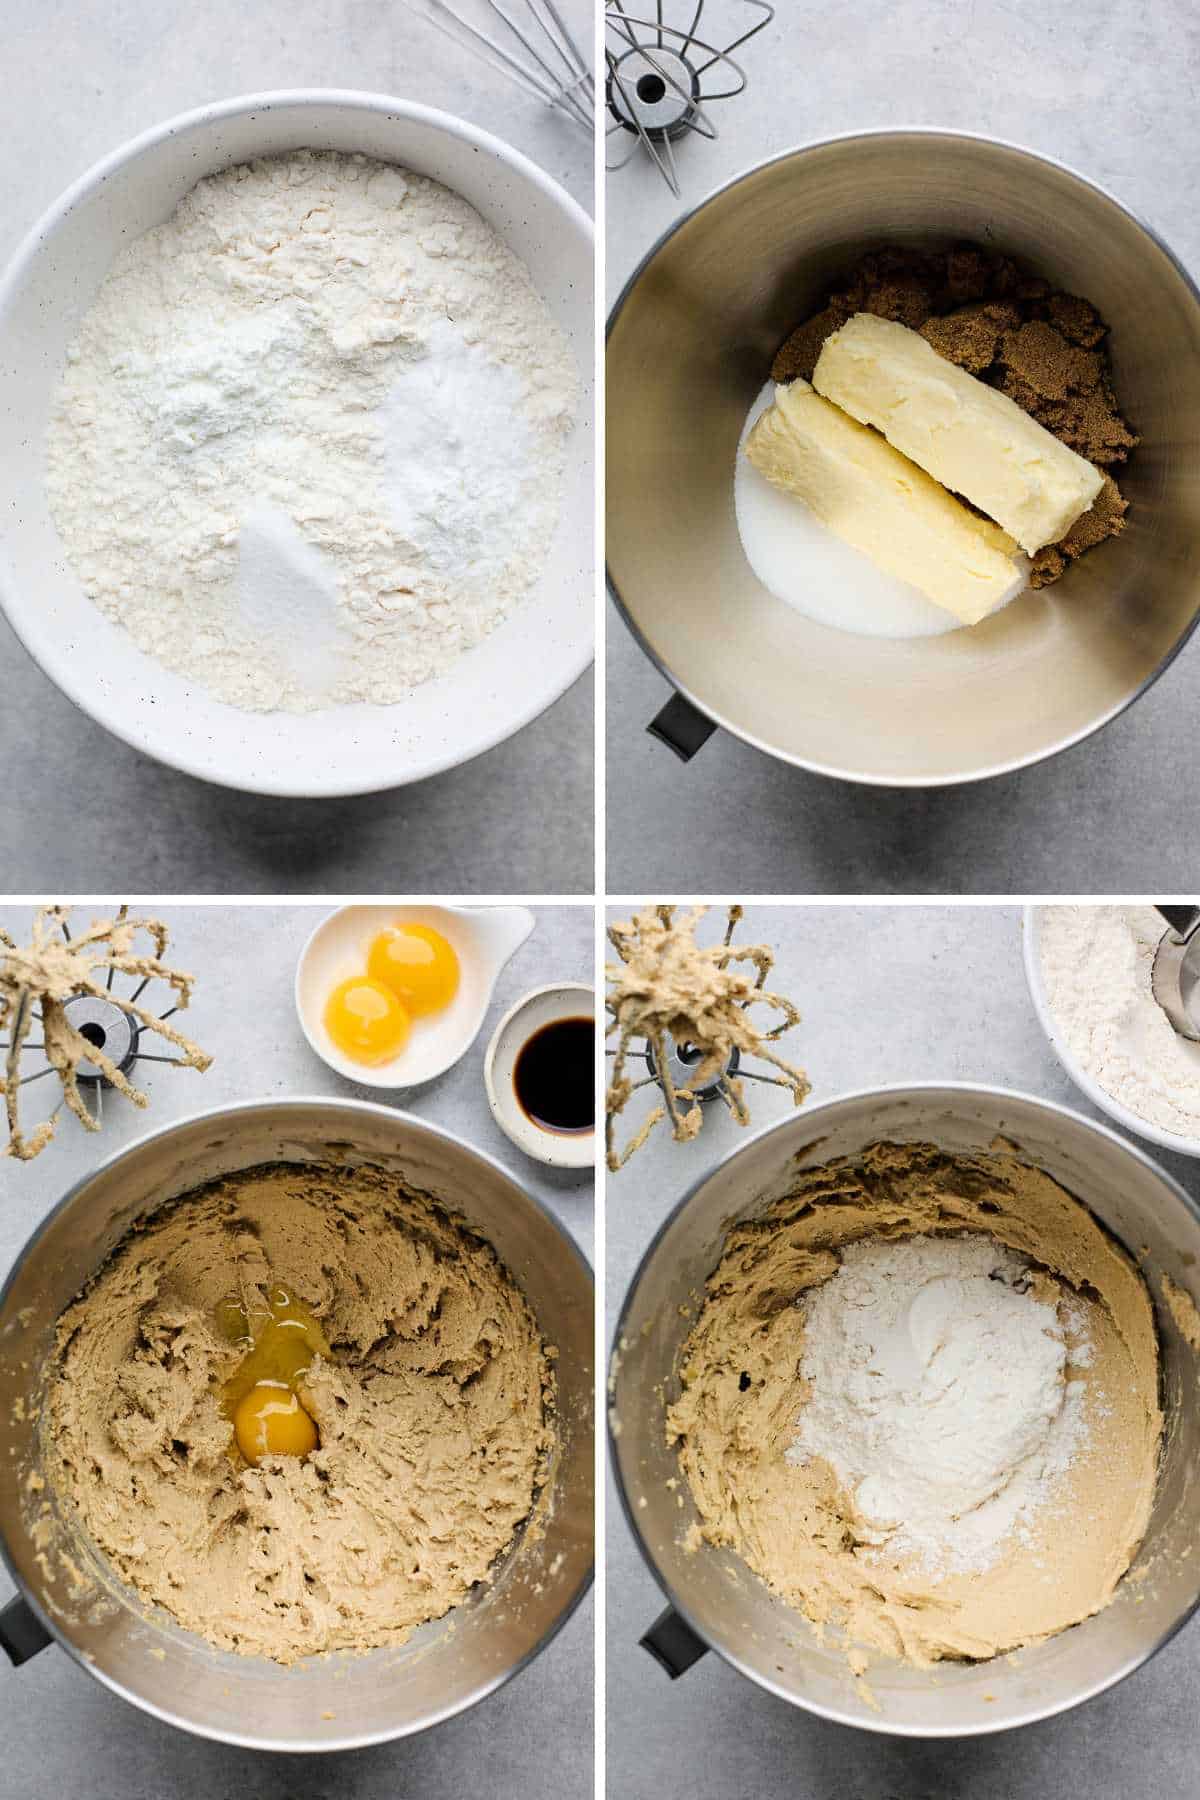 Mixing the flour and dry ingredients, creaming the butter and sugar, adding the egg, and finally the flour is added to the bowl.